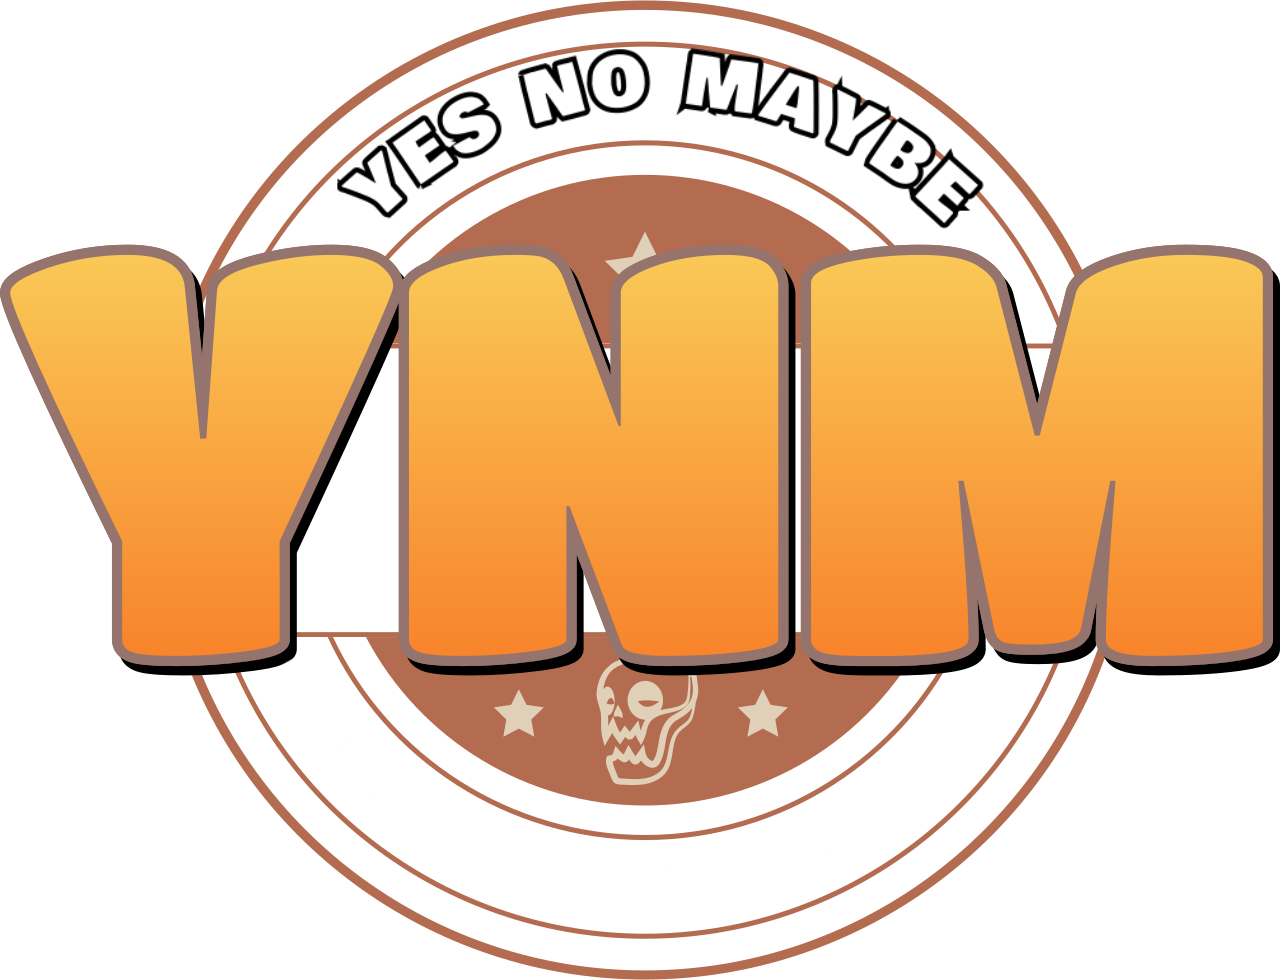 Yes No Maybe's logo